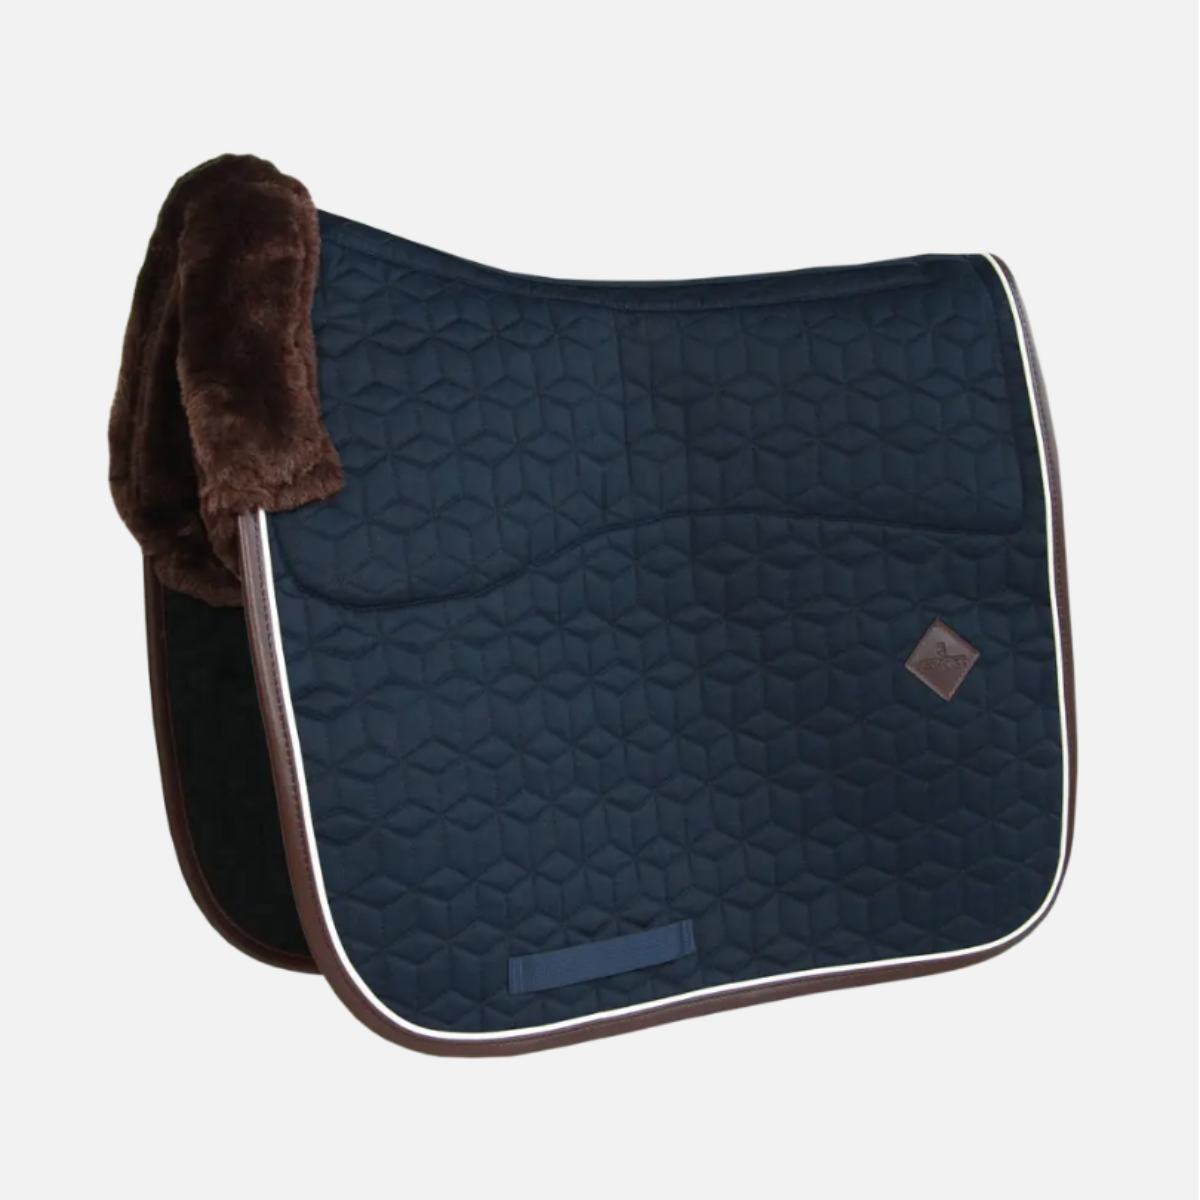 Kentucky Horsewear Skin Friendly Saddle Pad Dressage Star Quilting